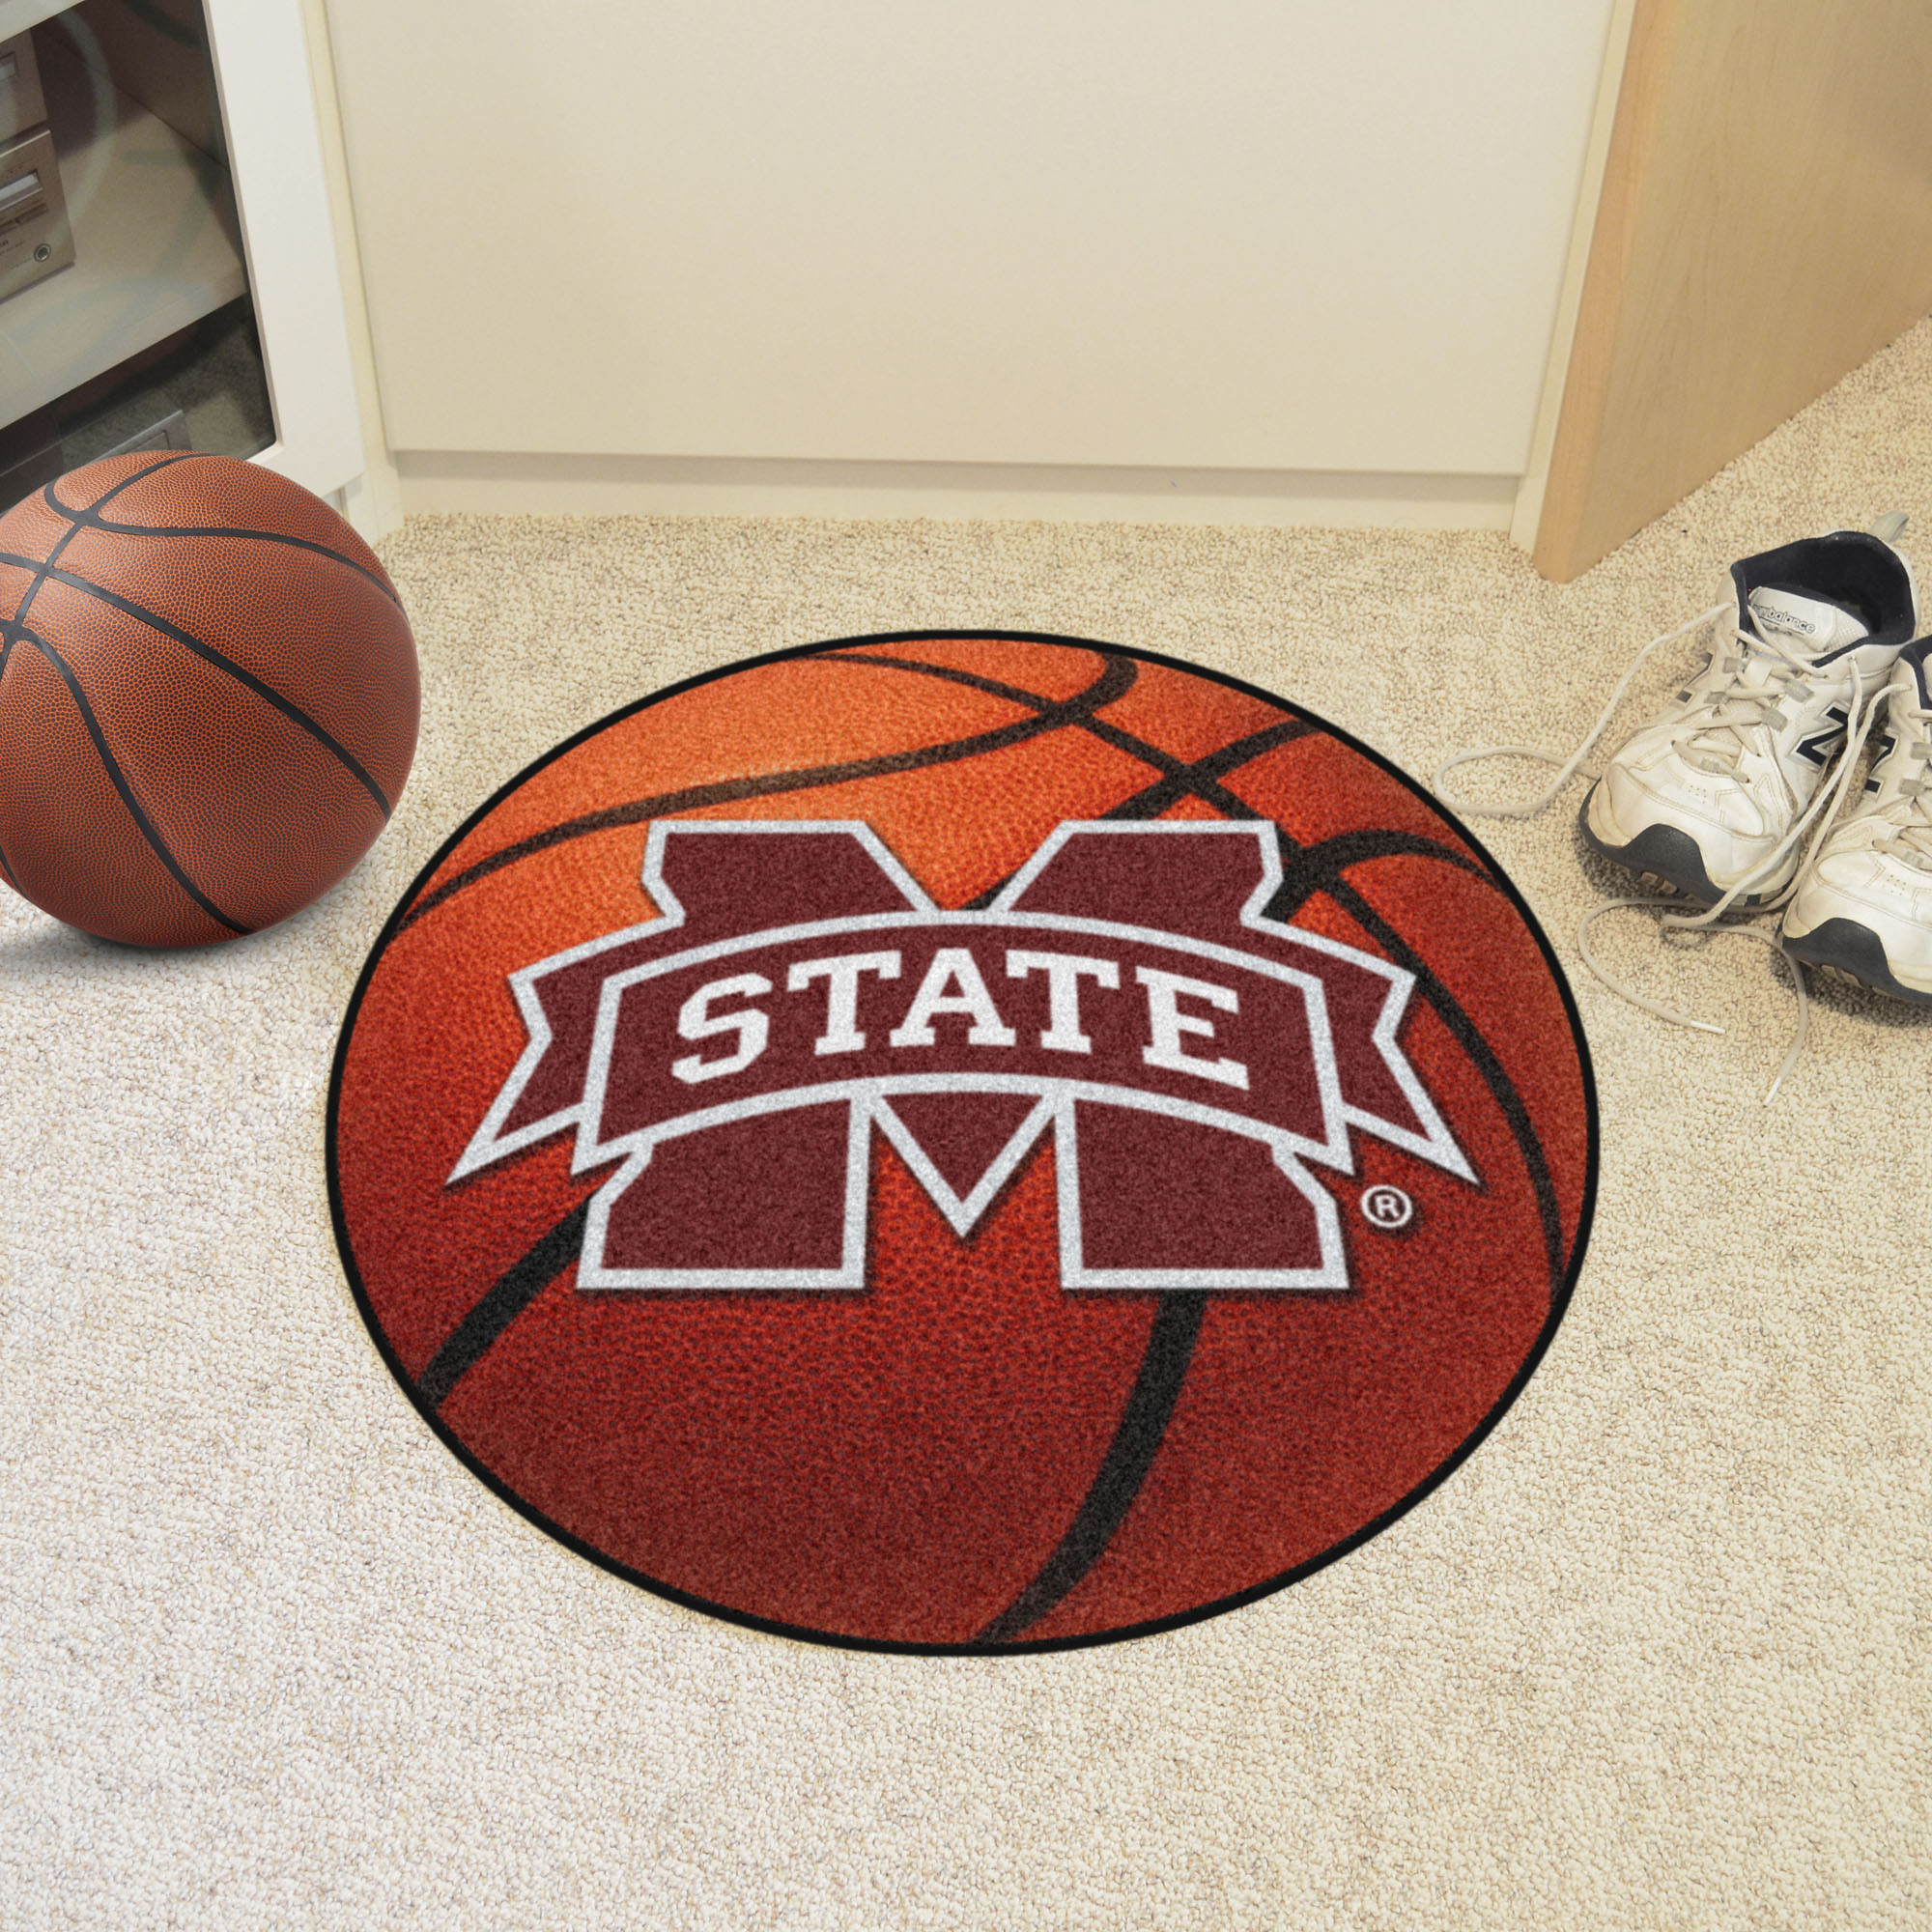 Mississippi State University Ball Shaped Area Rugs (Ball Shaped Area Rugs: Basketball)